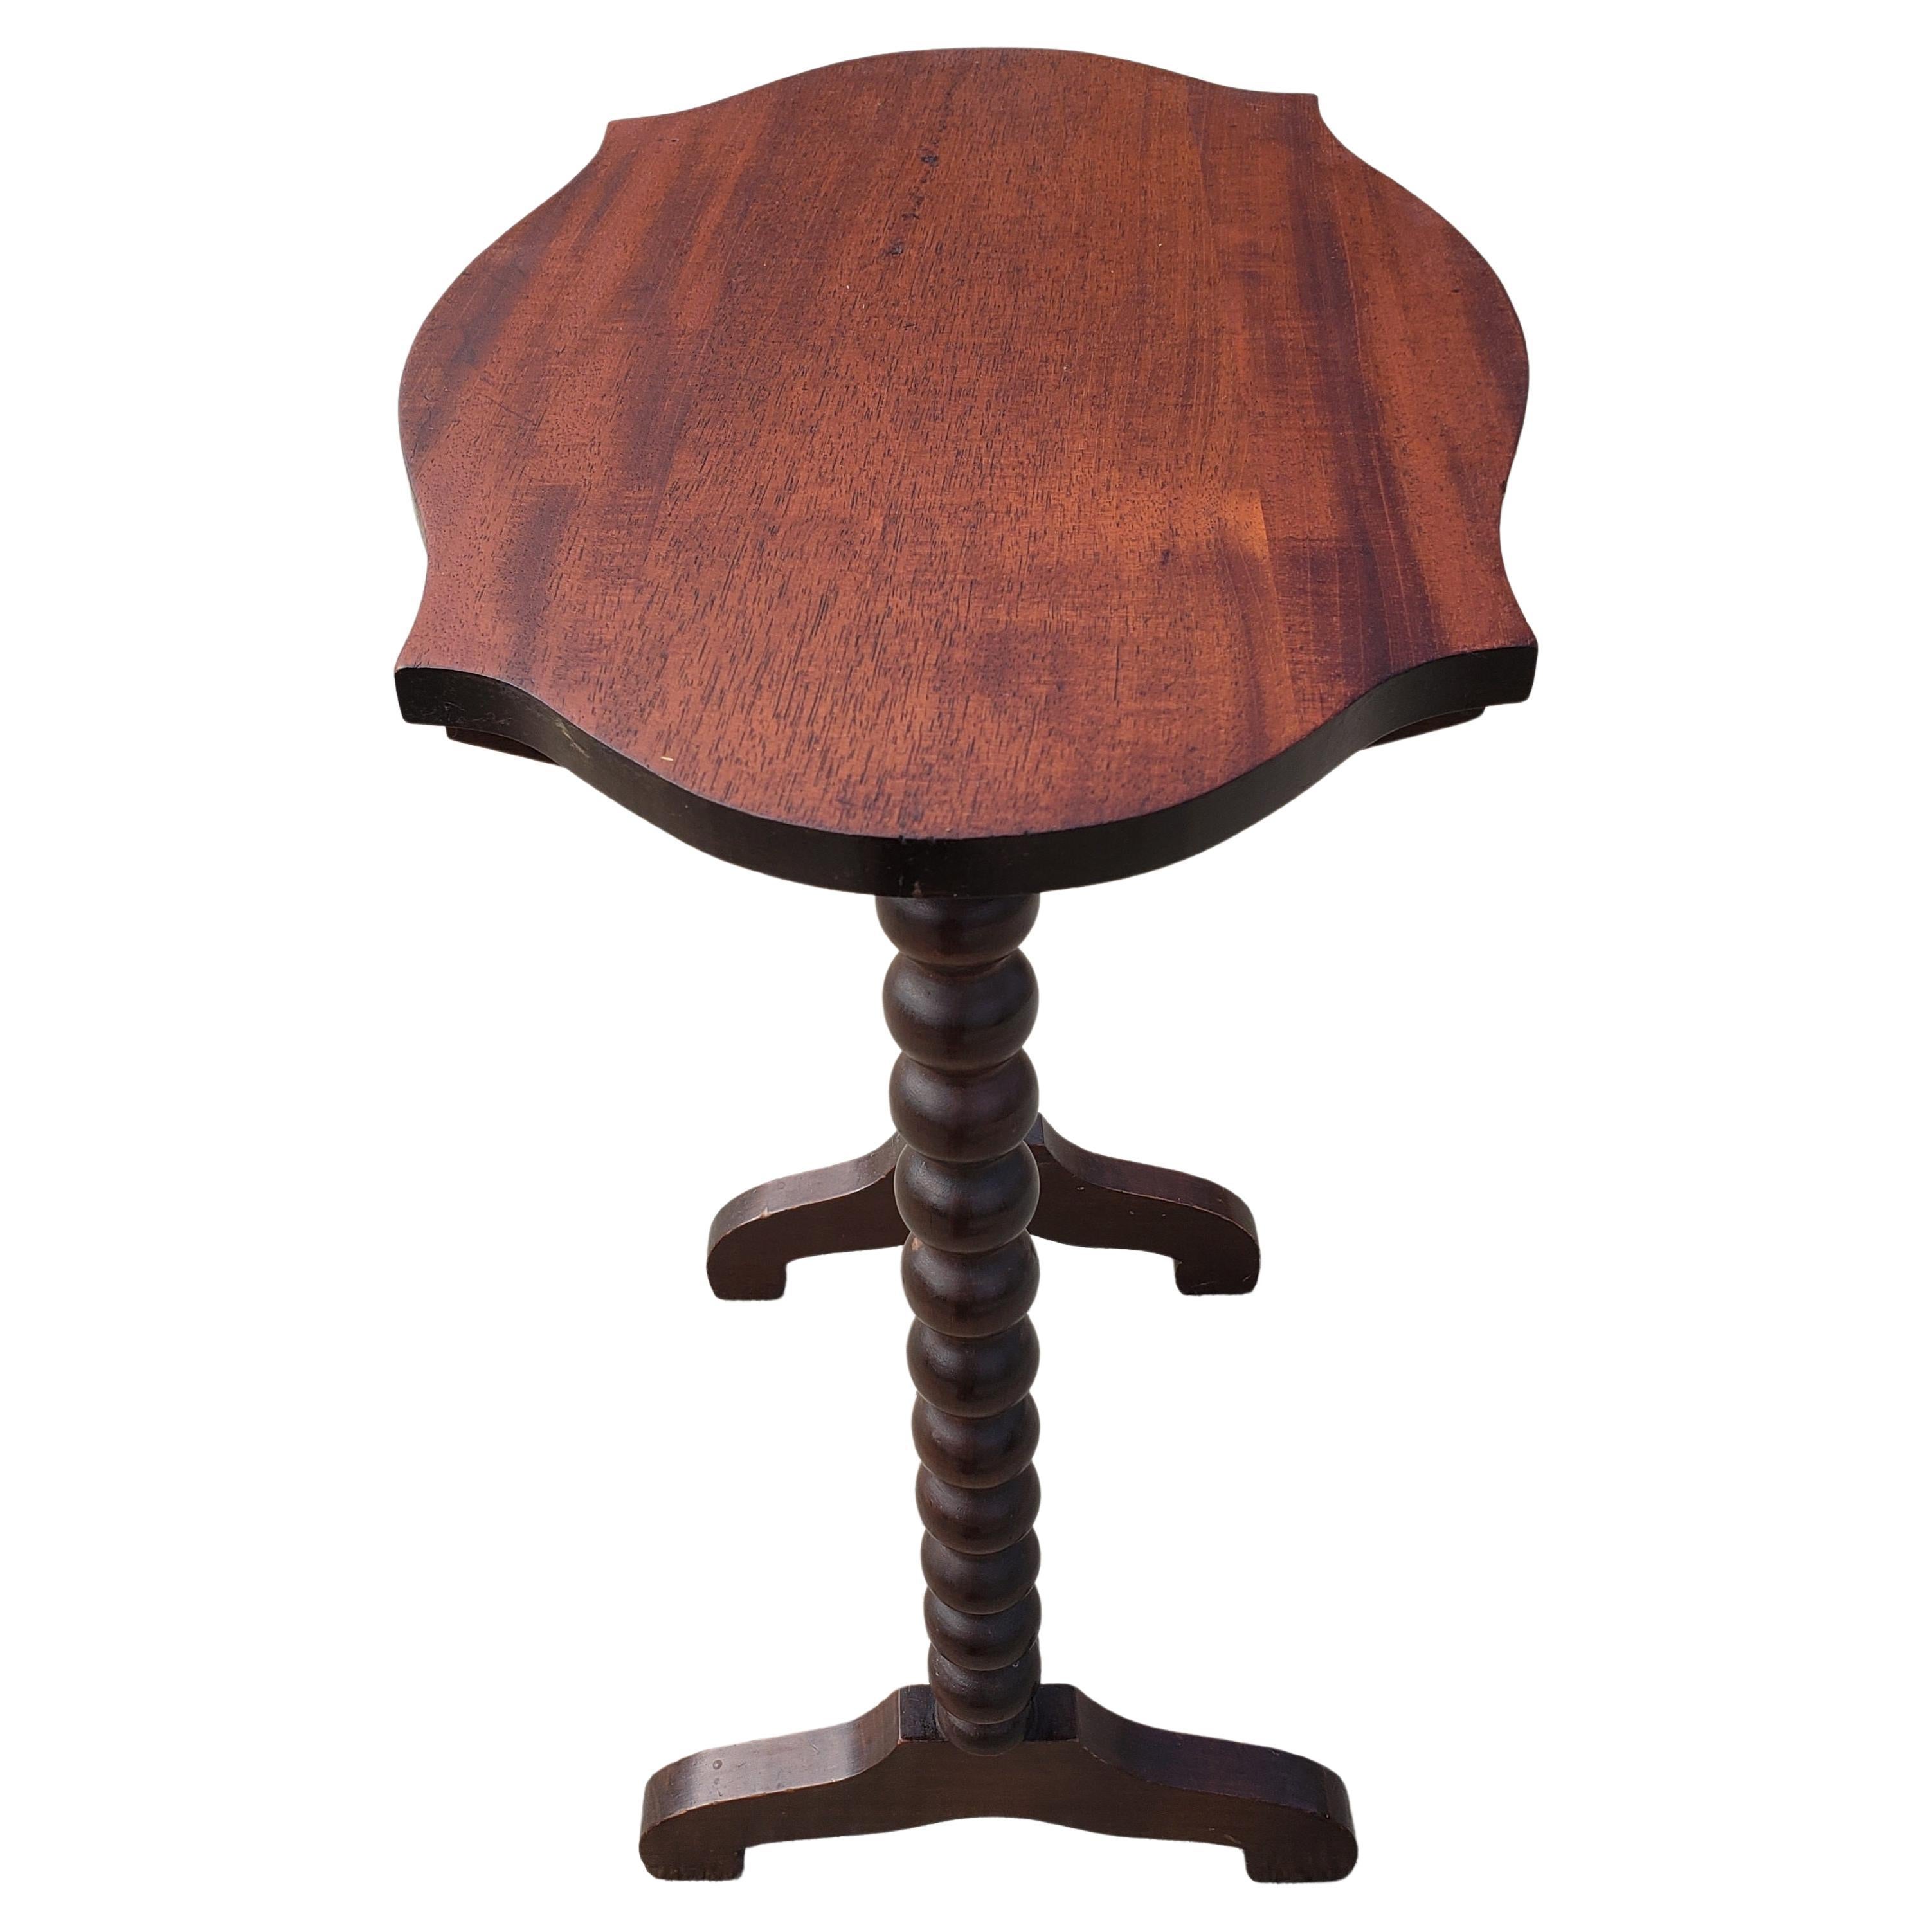 Woodwork Antique Edwardian bobbing Legs Side Table Candle Stand Lamp Table, Circa 1920s